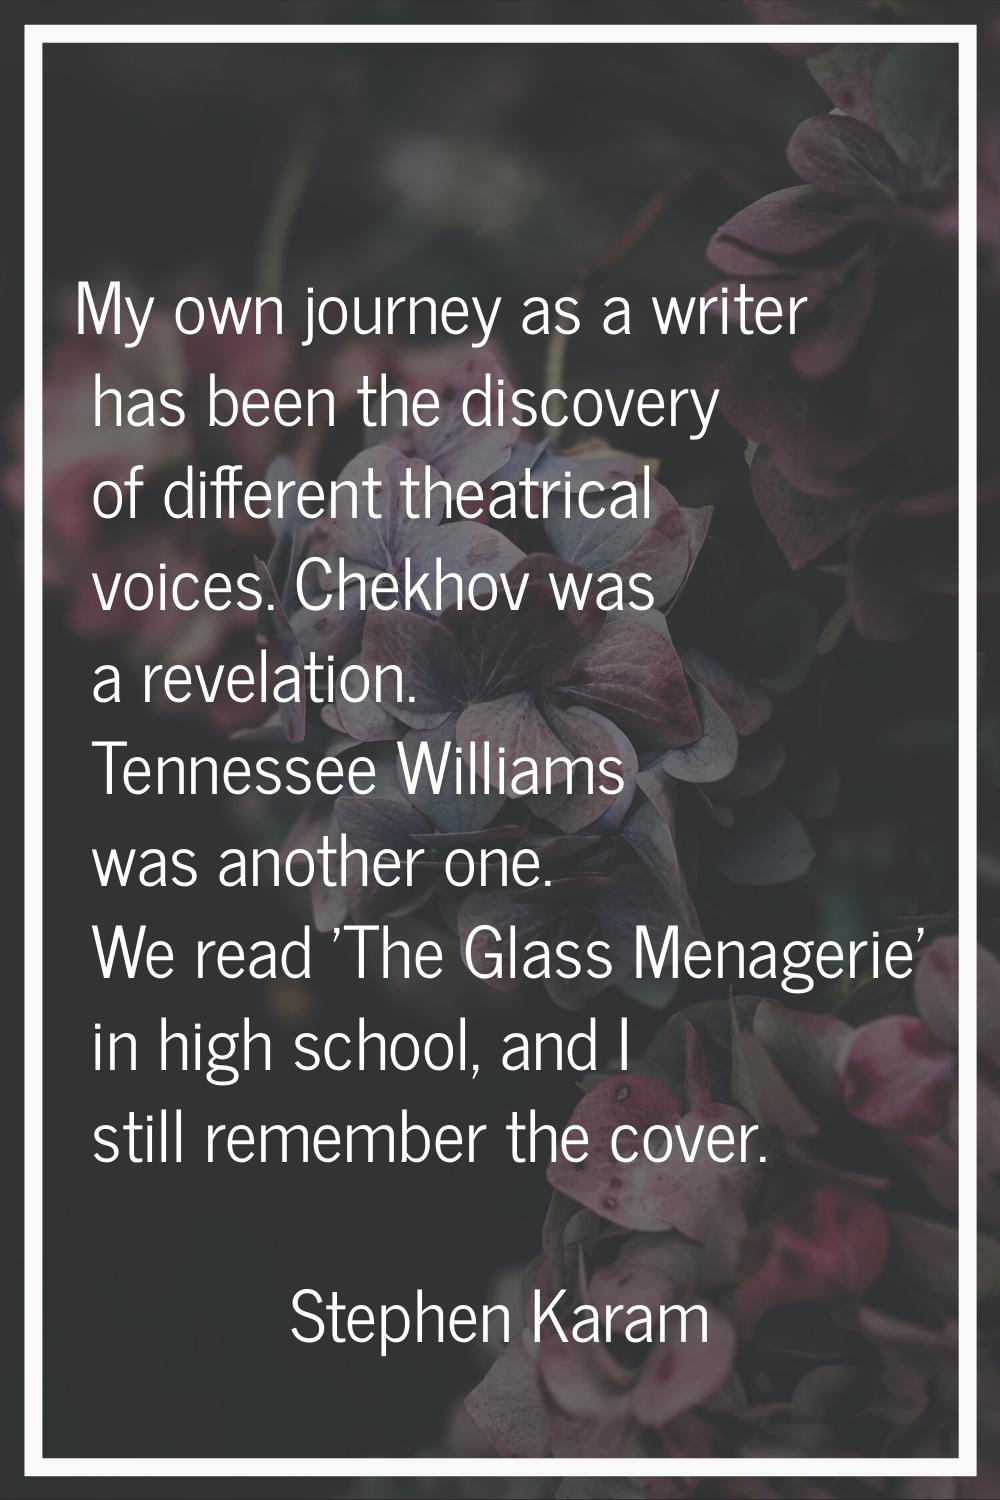 My own journey as a writer has been the discovery of different theatrical voices. Chekhov was a rev